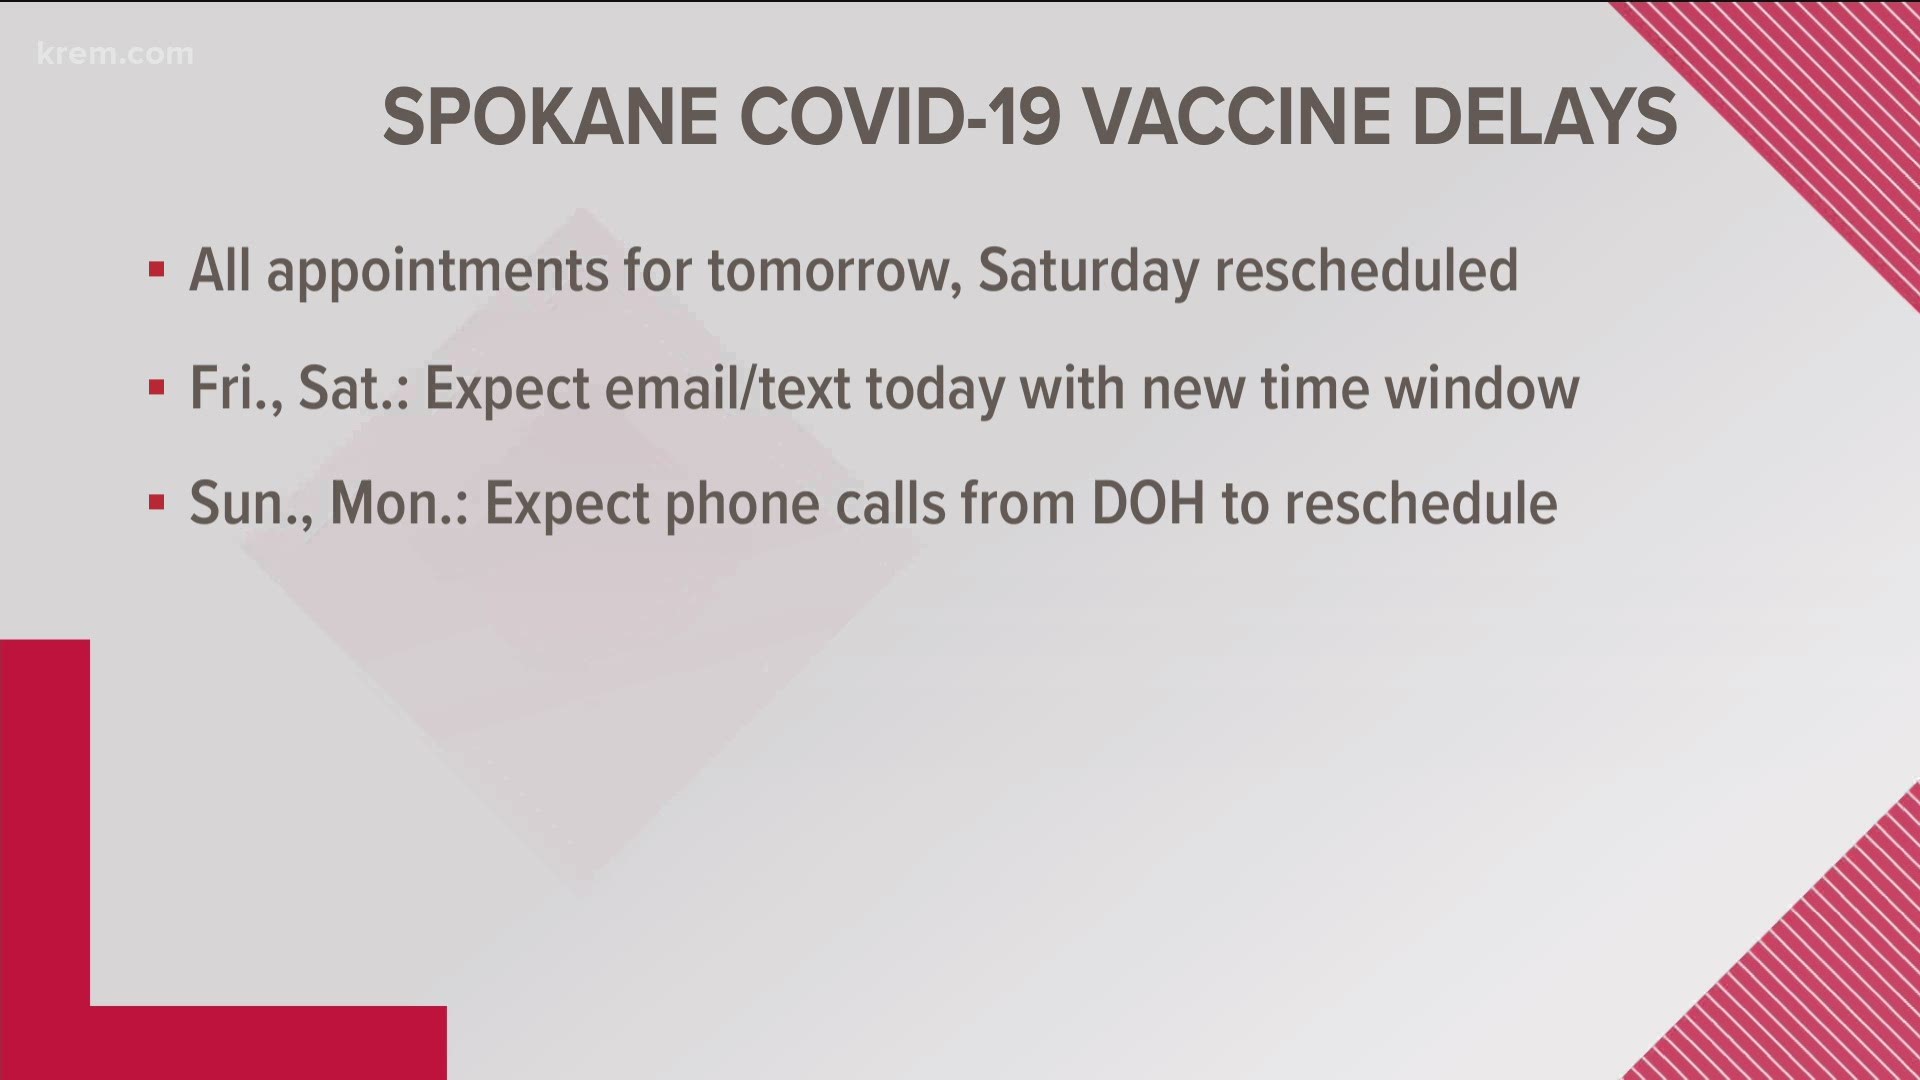 A handful of other health care providers in Spokane County are also rescheduling COVID-19 vaccine appointments as inclement weather leads to shipment delays.